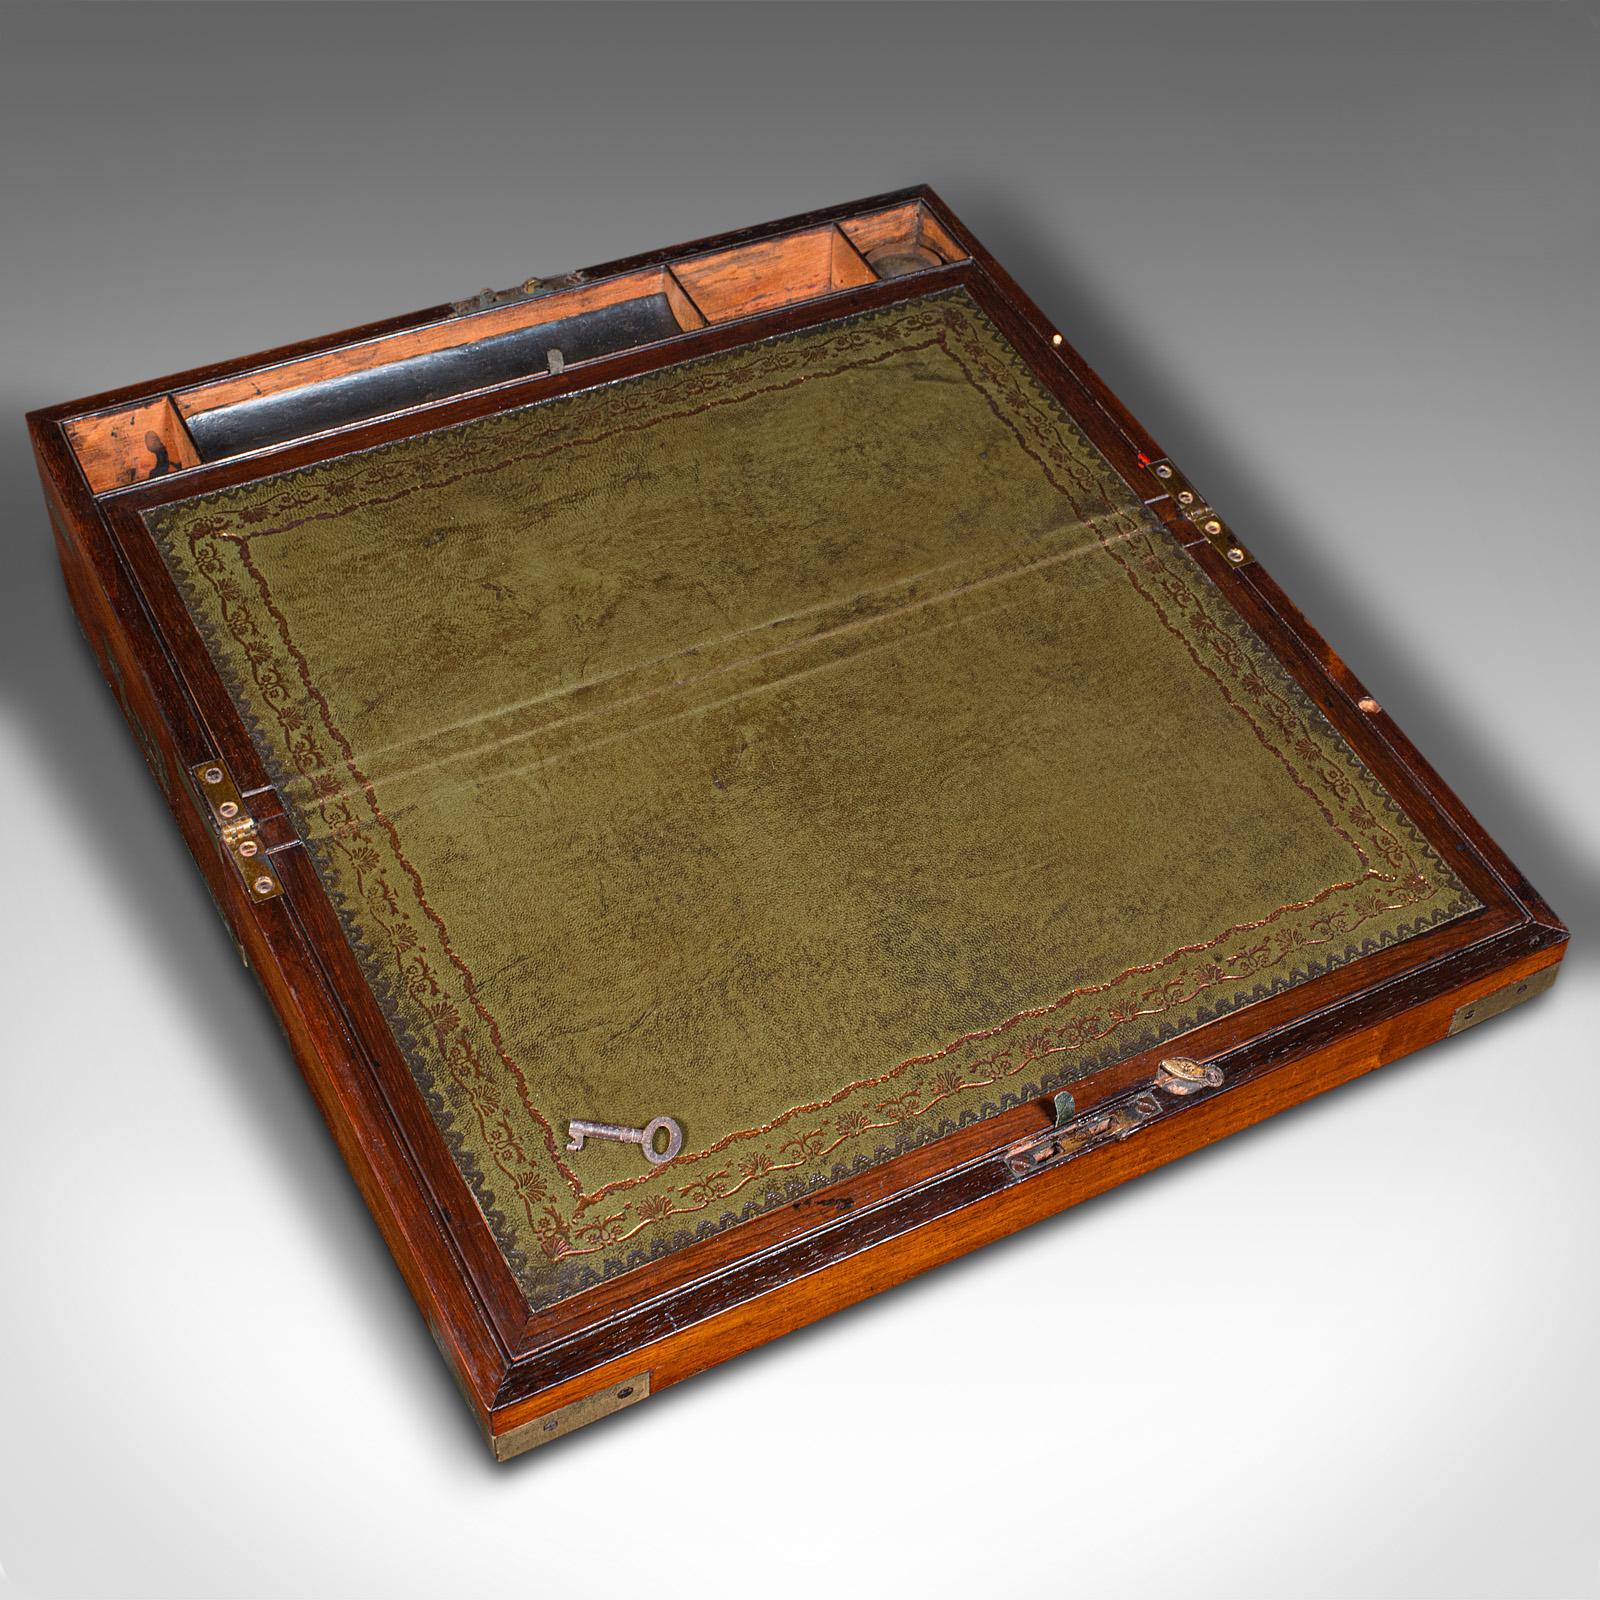 This is an antique military campaign writing slope. An English, walnut and leather correspondence box, dating to the early Victorian period, circa 1850.

Finely crafted writing slope, used in period when away from home
Displaying a desirable aged